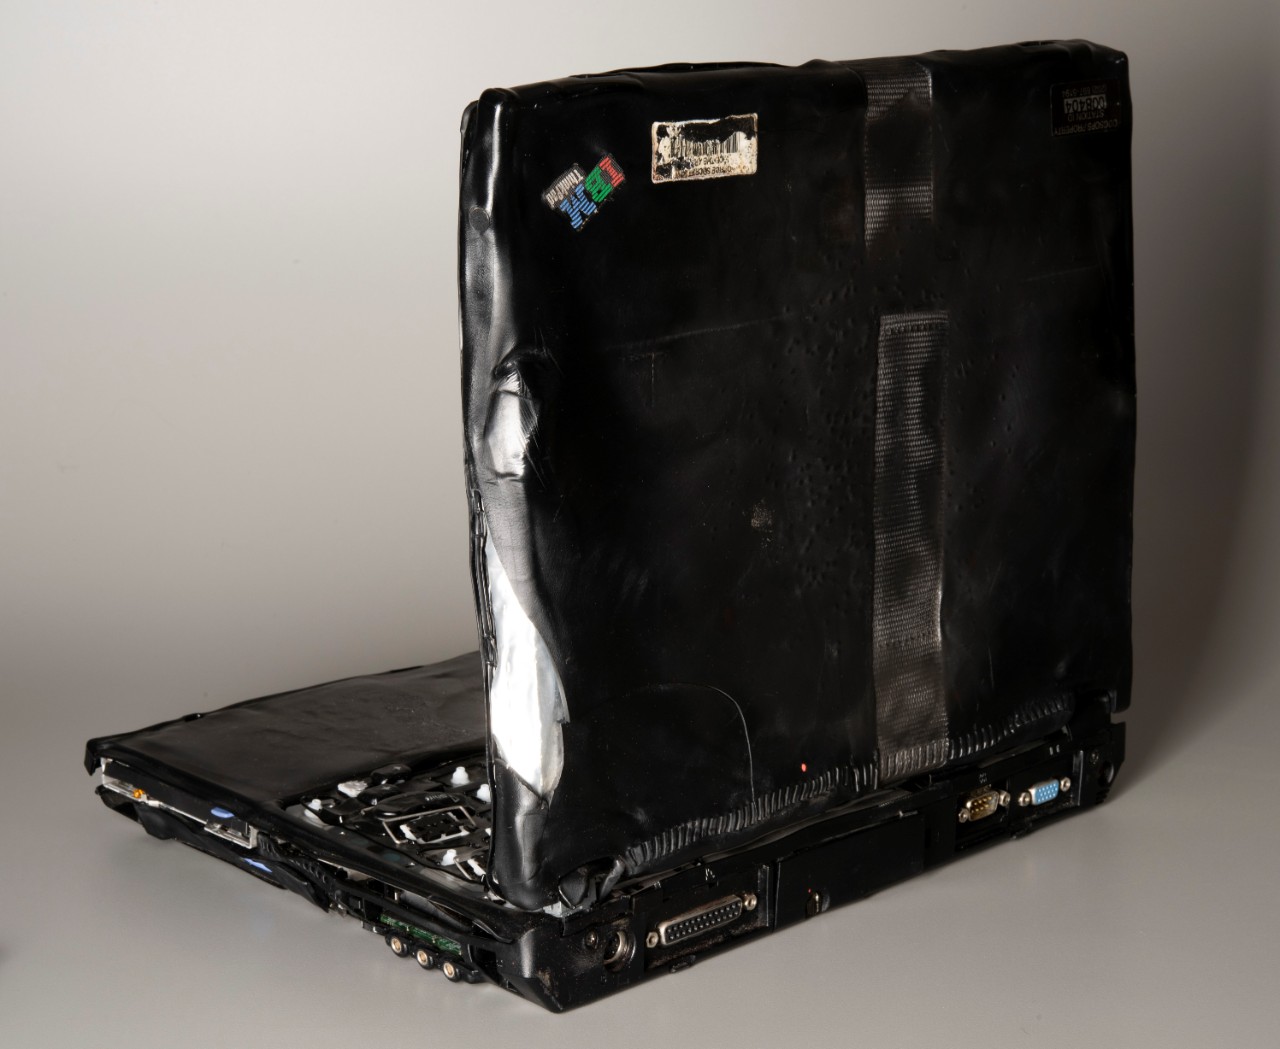 Heat damage from the fire after the attack on the Pentagon caused thermoplastic components to melt, warp, and keys to separate from the base of the laptop. Additionally, heat formed an impression of a security strap on the exterior of the laptop ...